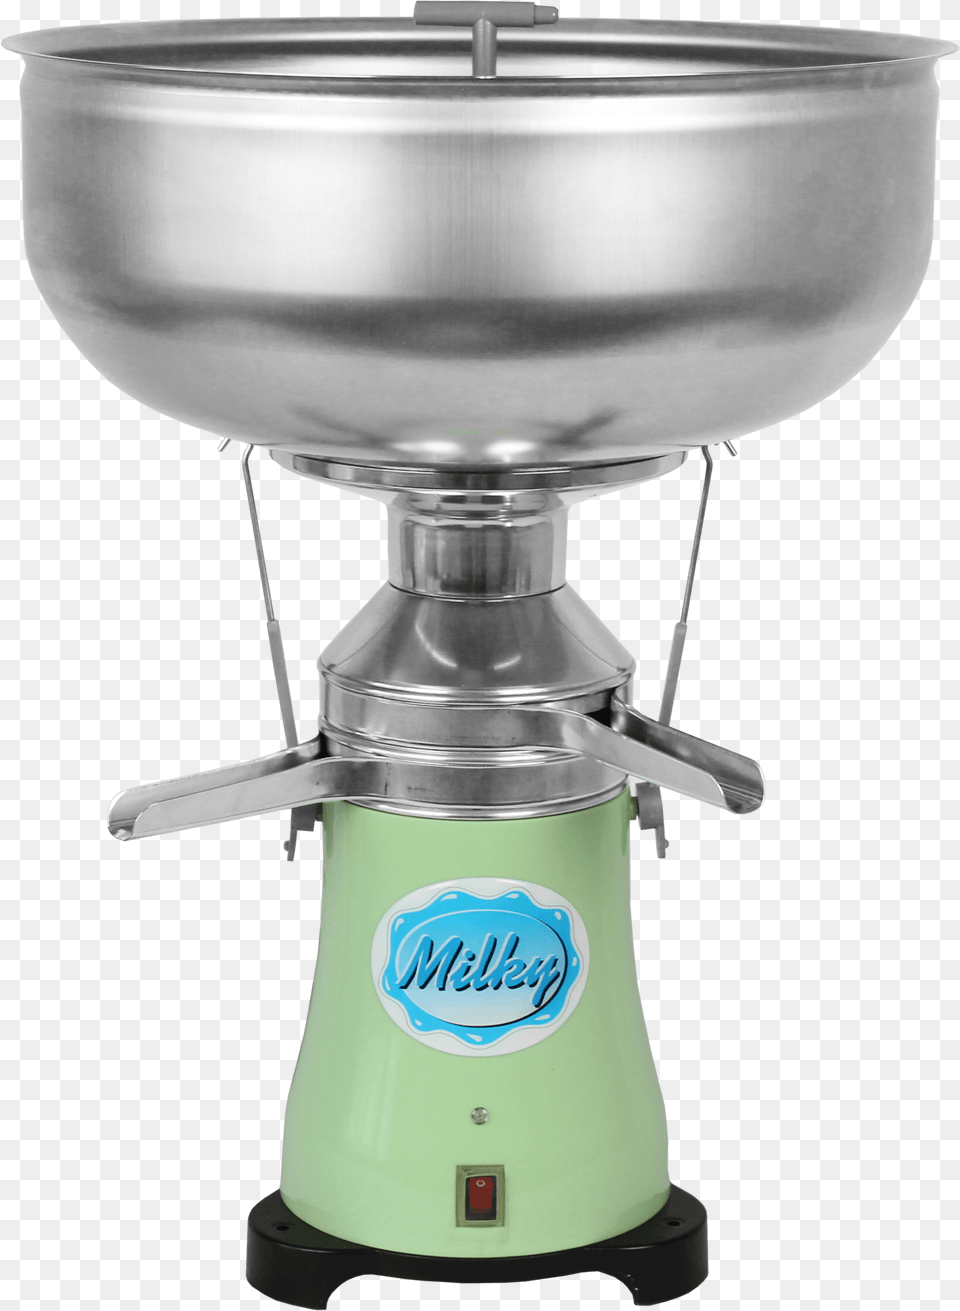 An Electric Cream Separator On A White Background Cream Separator Machine, Device, Appliance, Electrical Device, Bottle Png Image